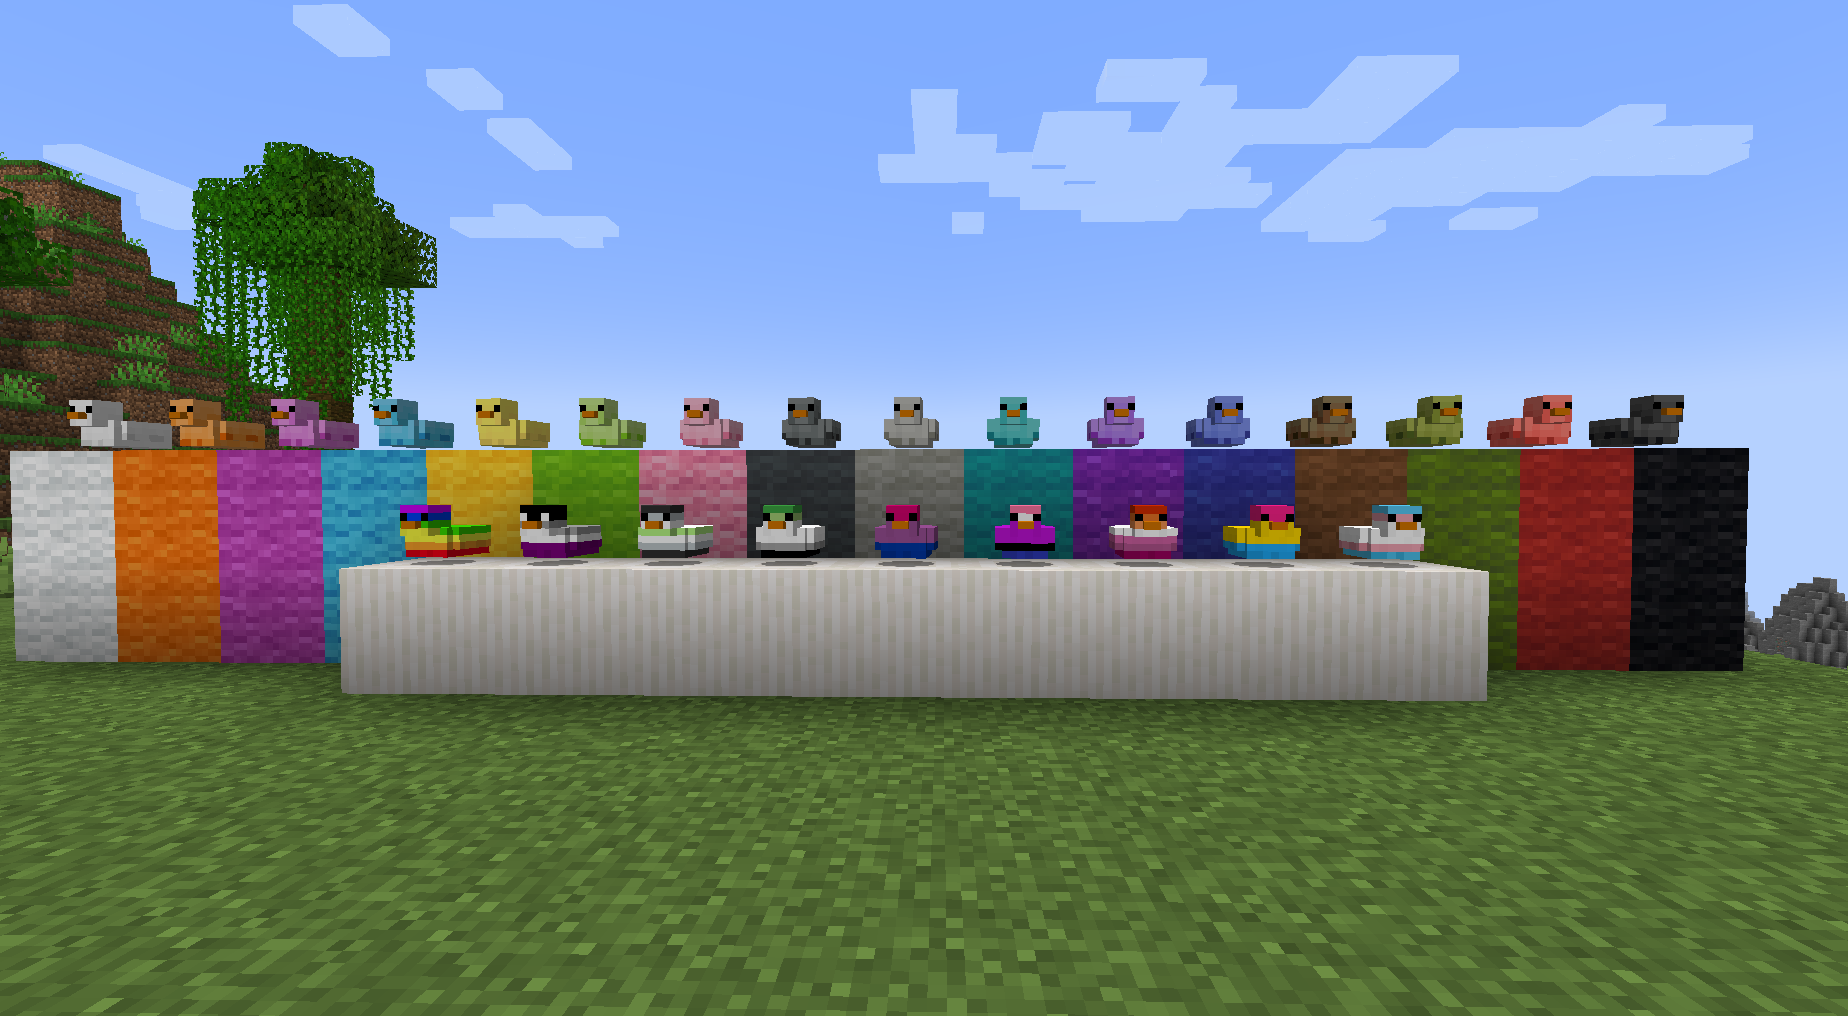 All the ducks the mod contains as of version v0.2.0